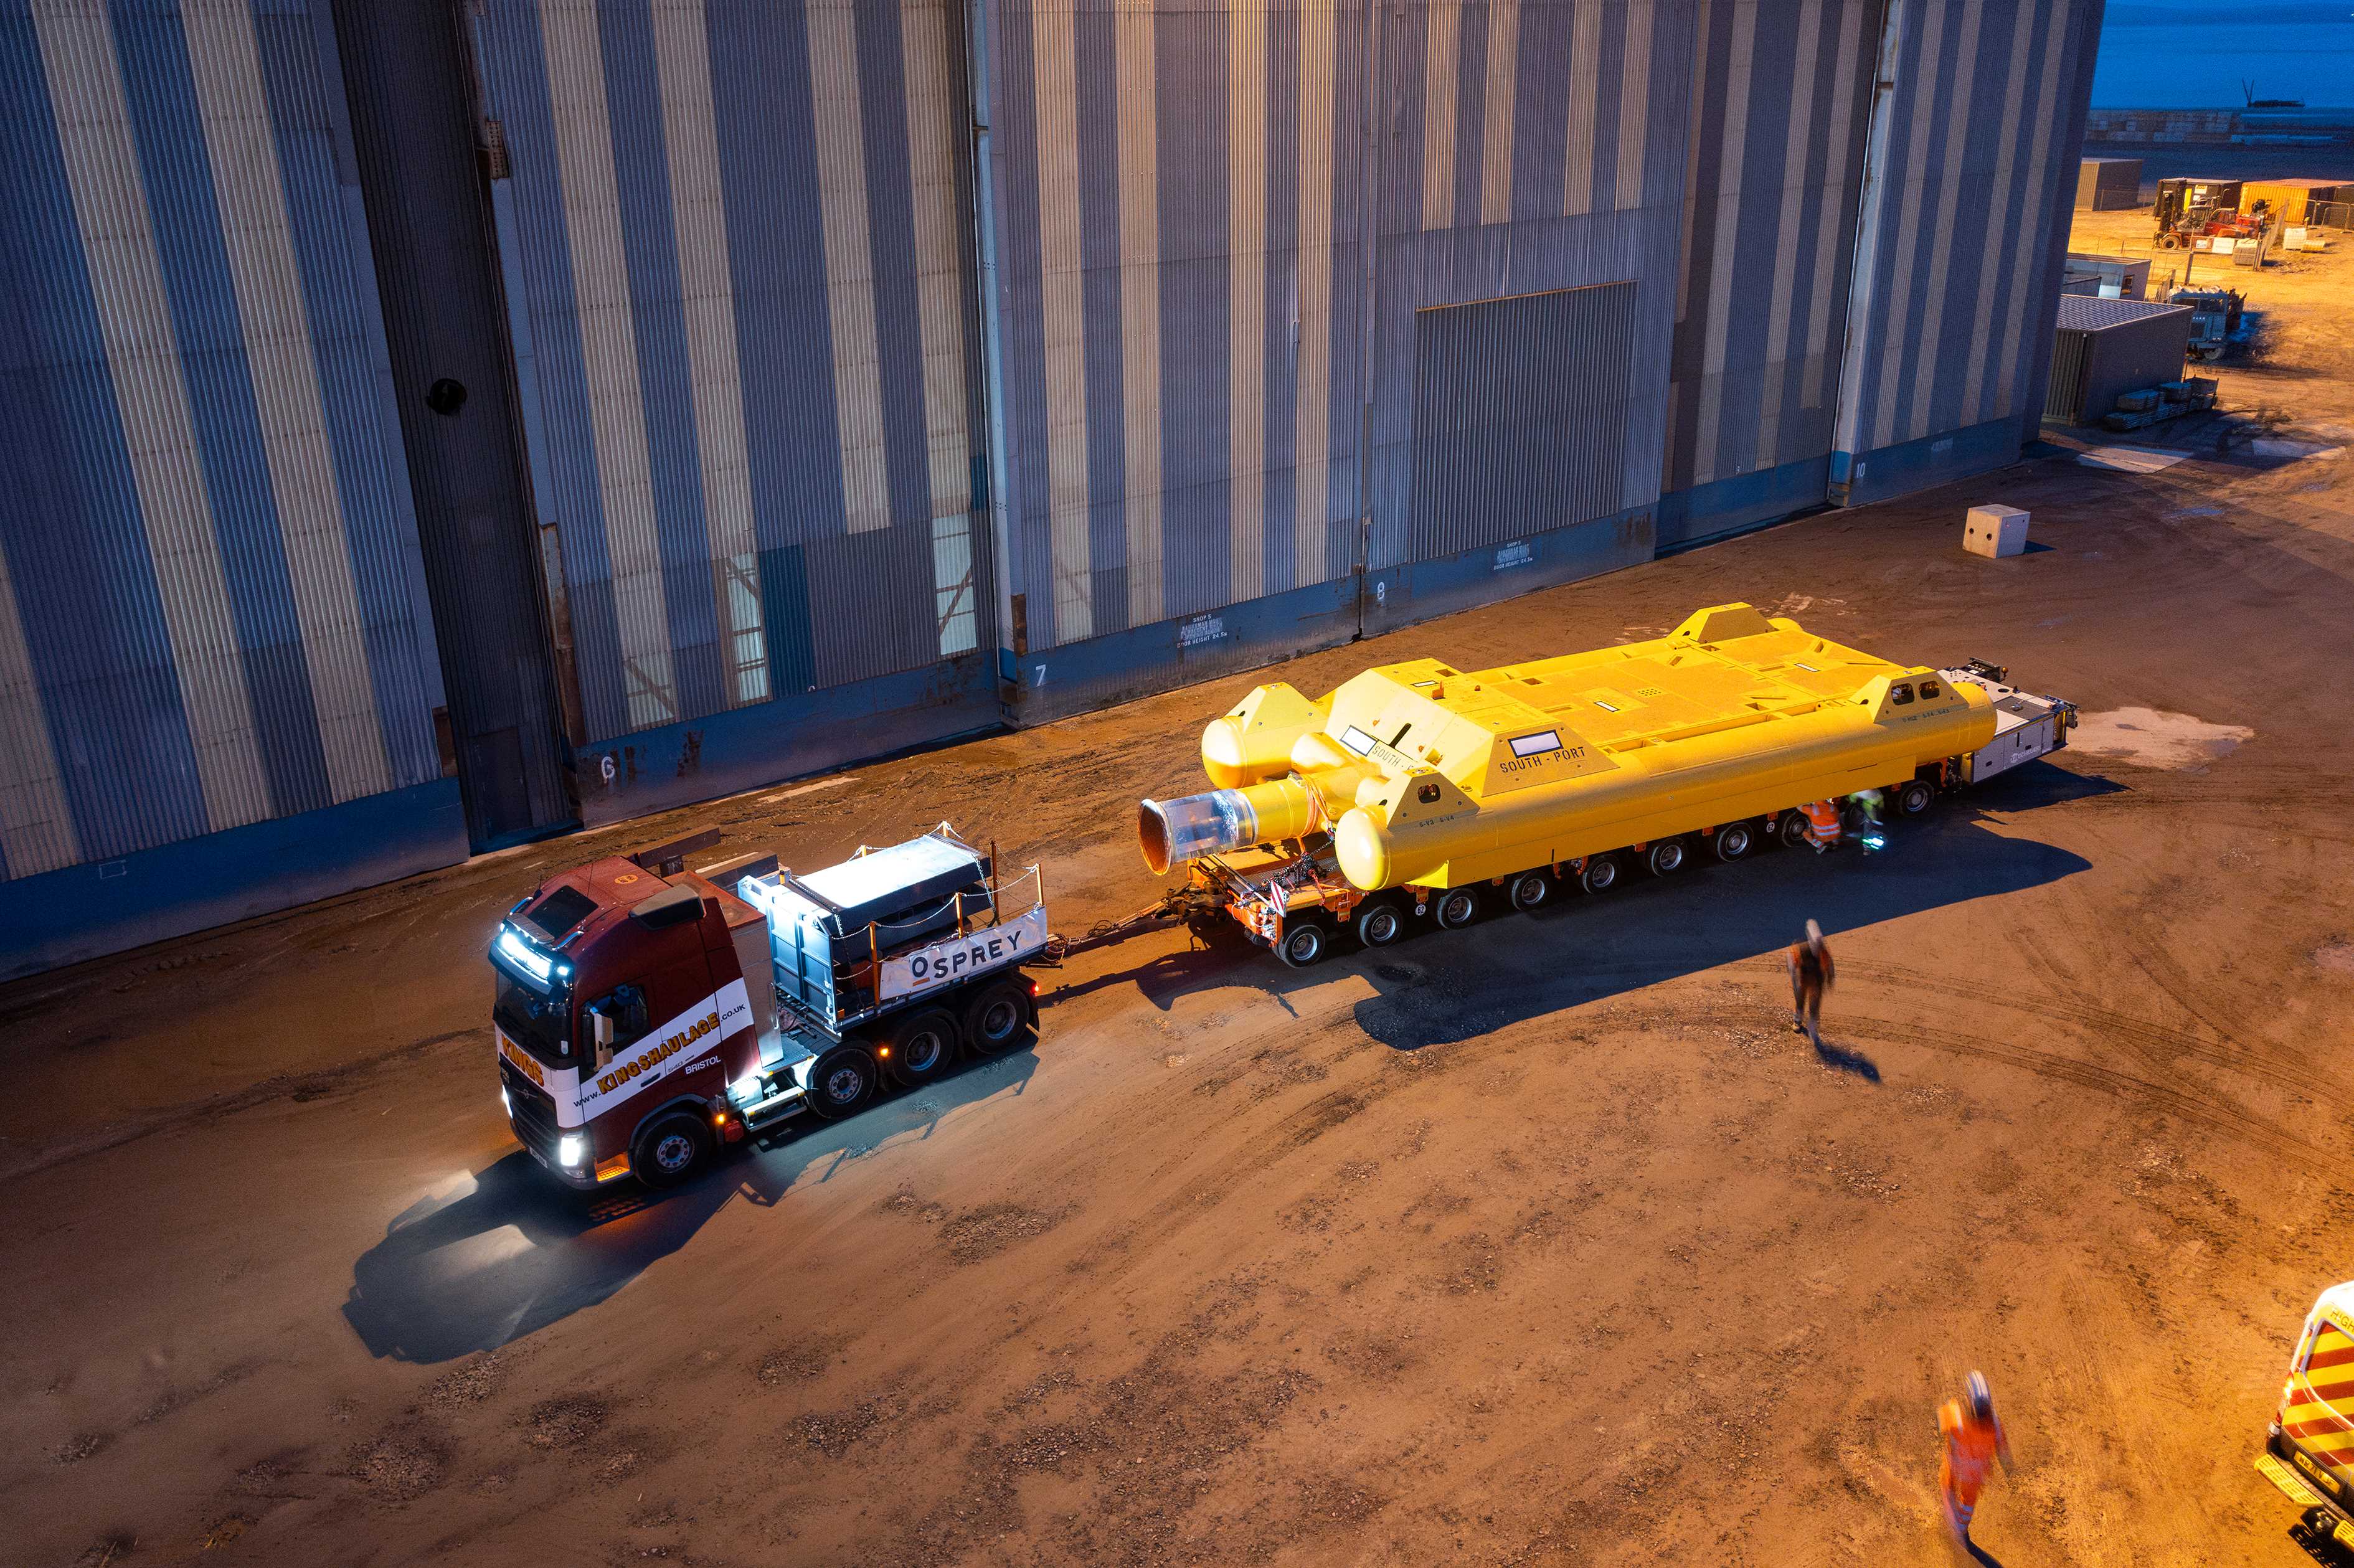 Global Energy Group (GEG) has finished the fabrication process of two towheads, complete with equipment interface support frames and buoyancy tank interface frame from the Port of Nigg, on behalf of Subsea7 for the Aker BP-operated Valhall PWP-Fenris field in the North Sea off Norway